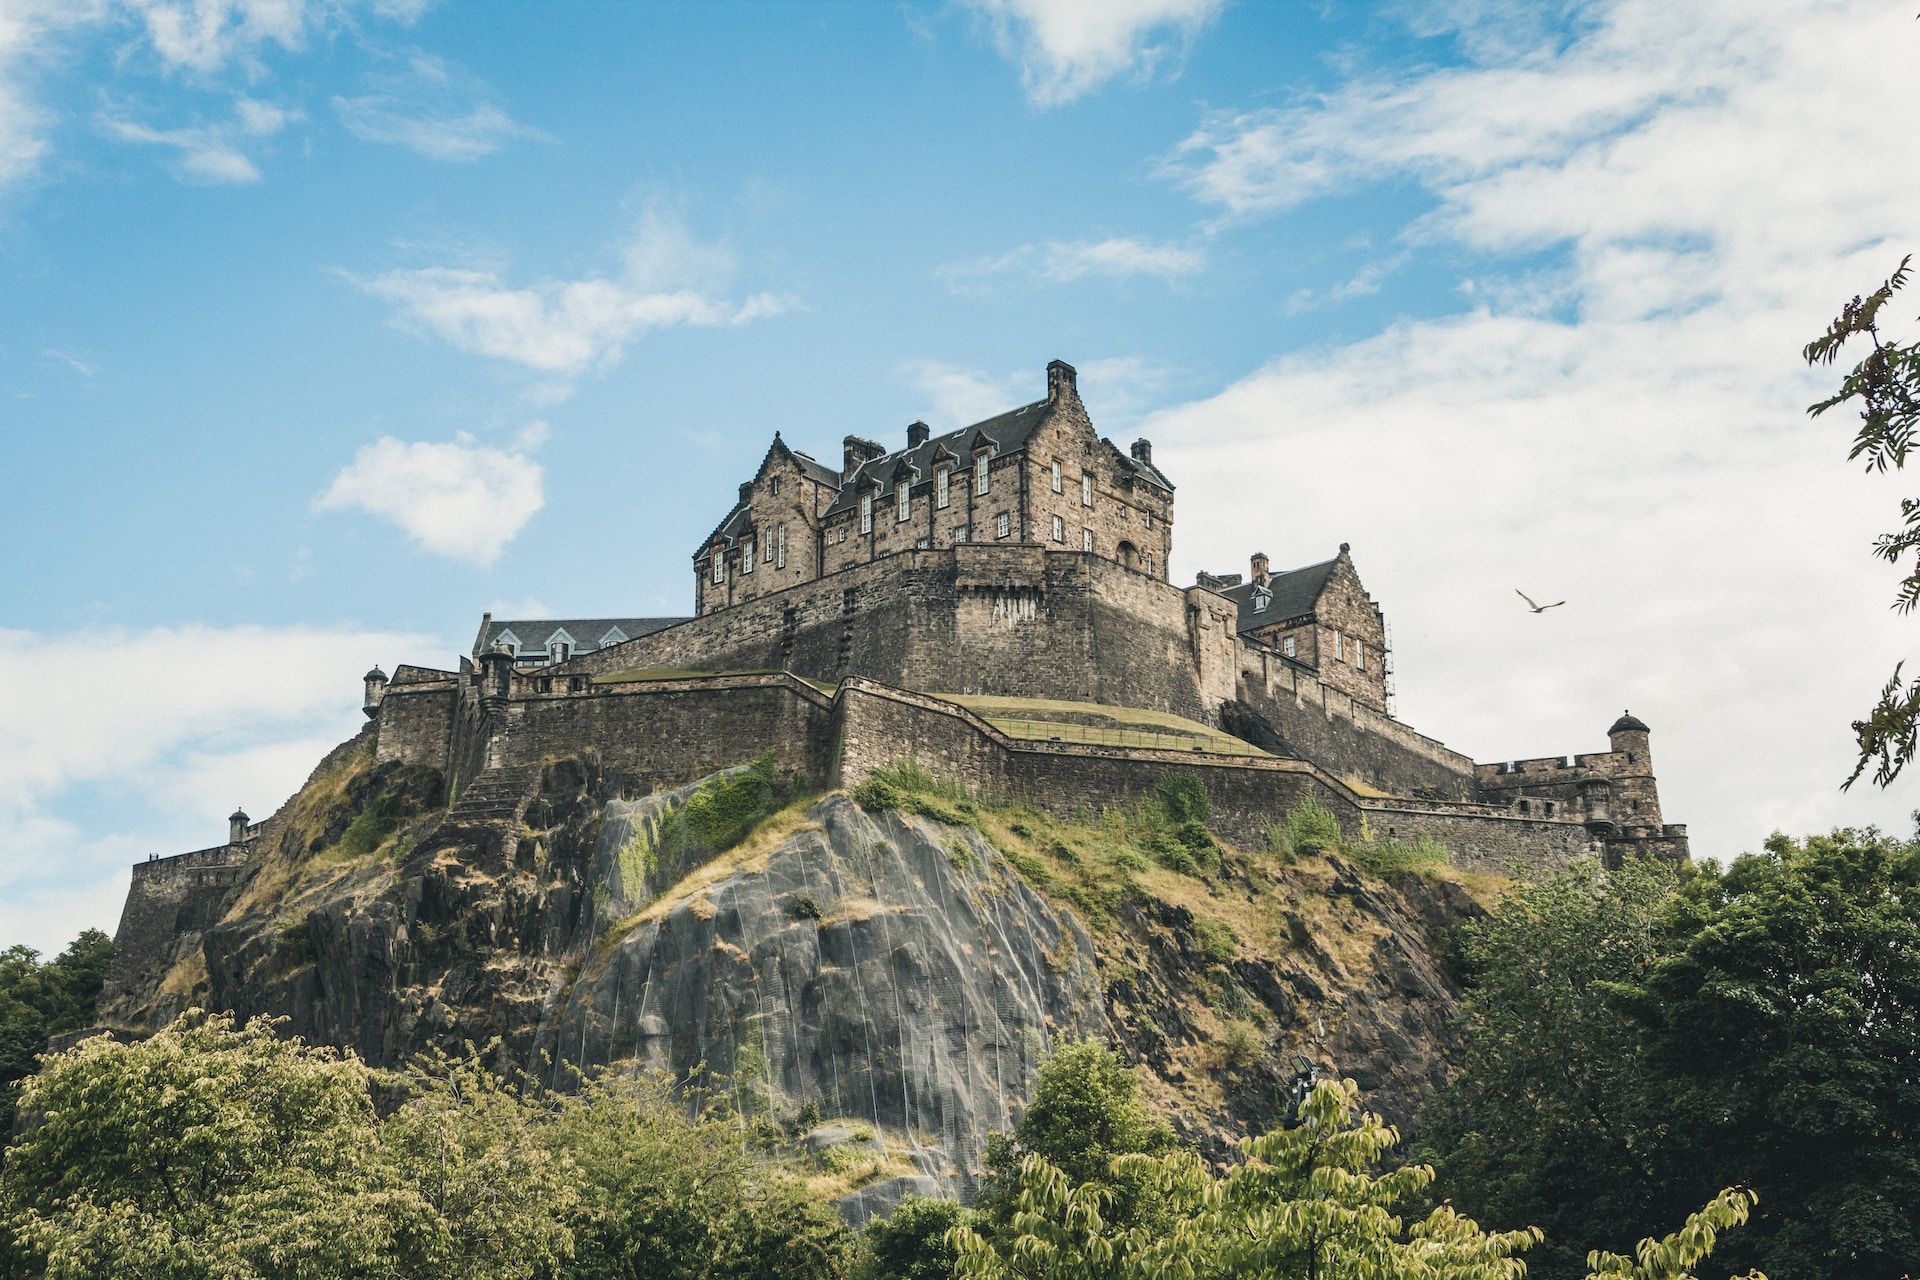 View of the imposing Edinburgh Castle which is said to have a striking resemblance to the fictional Hogwarts School in Edinburgh, Scotland